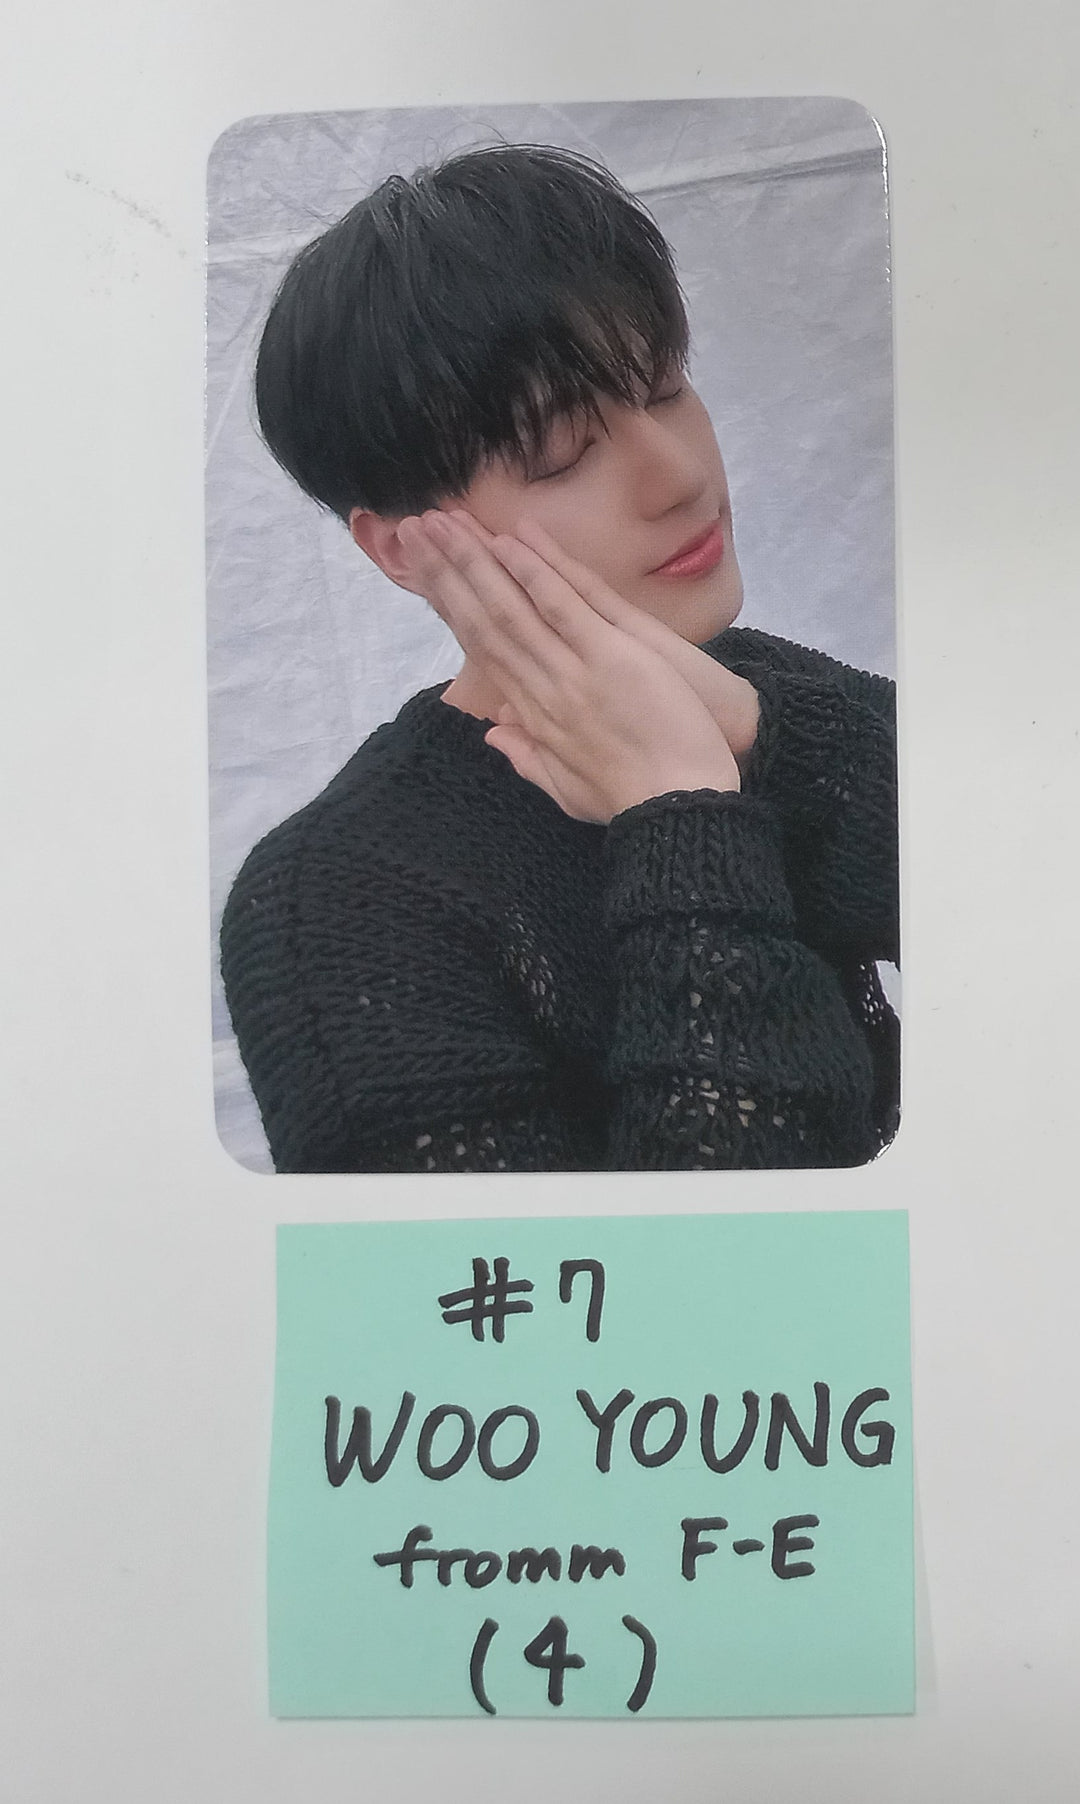 Ateez "The World Ep.Fin : Will" - Fromm Store Fansign Event Photocard Round 3 [Digipack Ver.] [24.3.14]